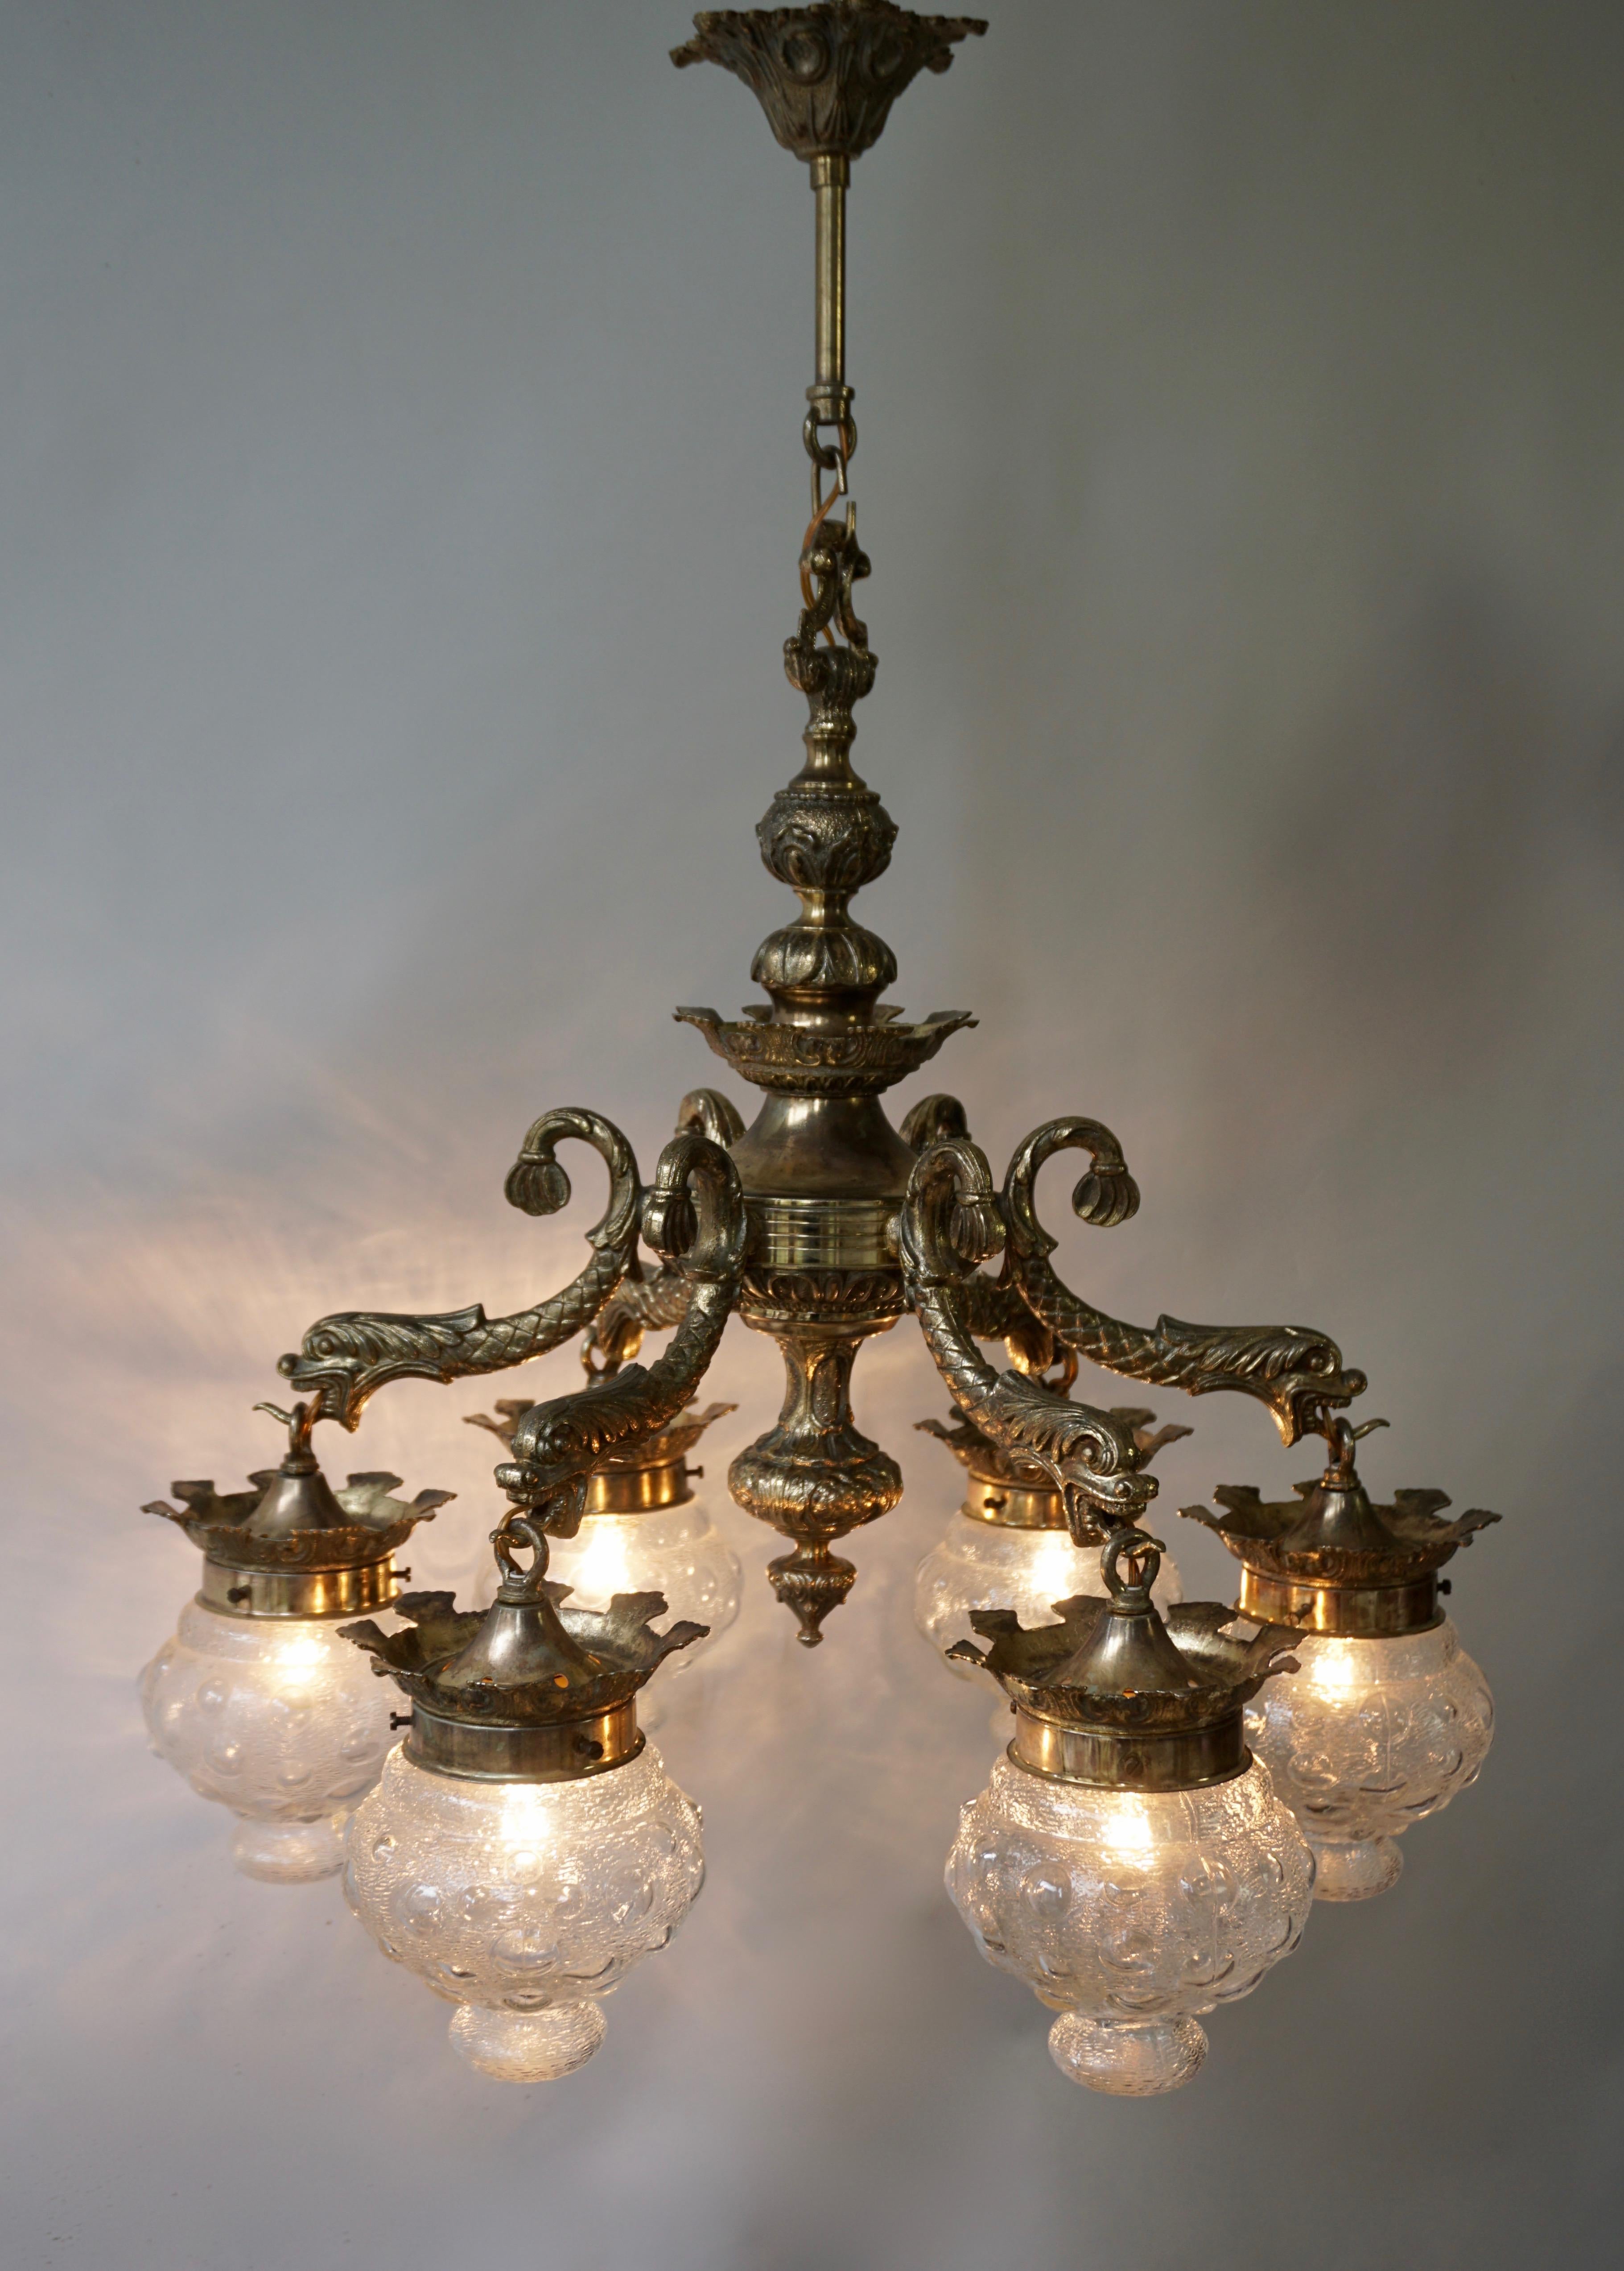 Italian Stunning Brass Chandelier in Gothic or Medieval Style with Dragon Sculptures For Sale